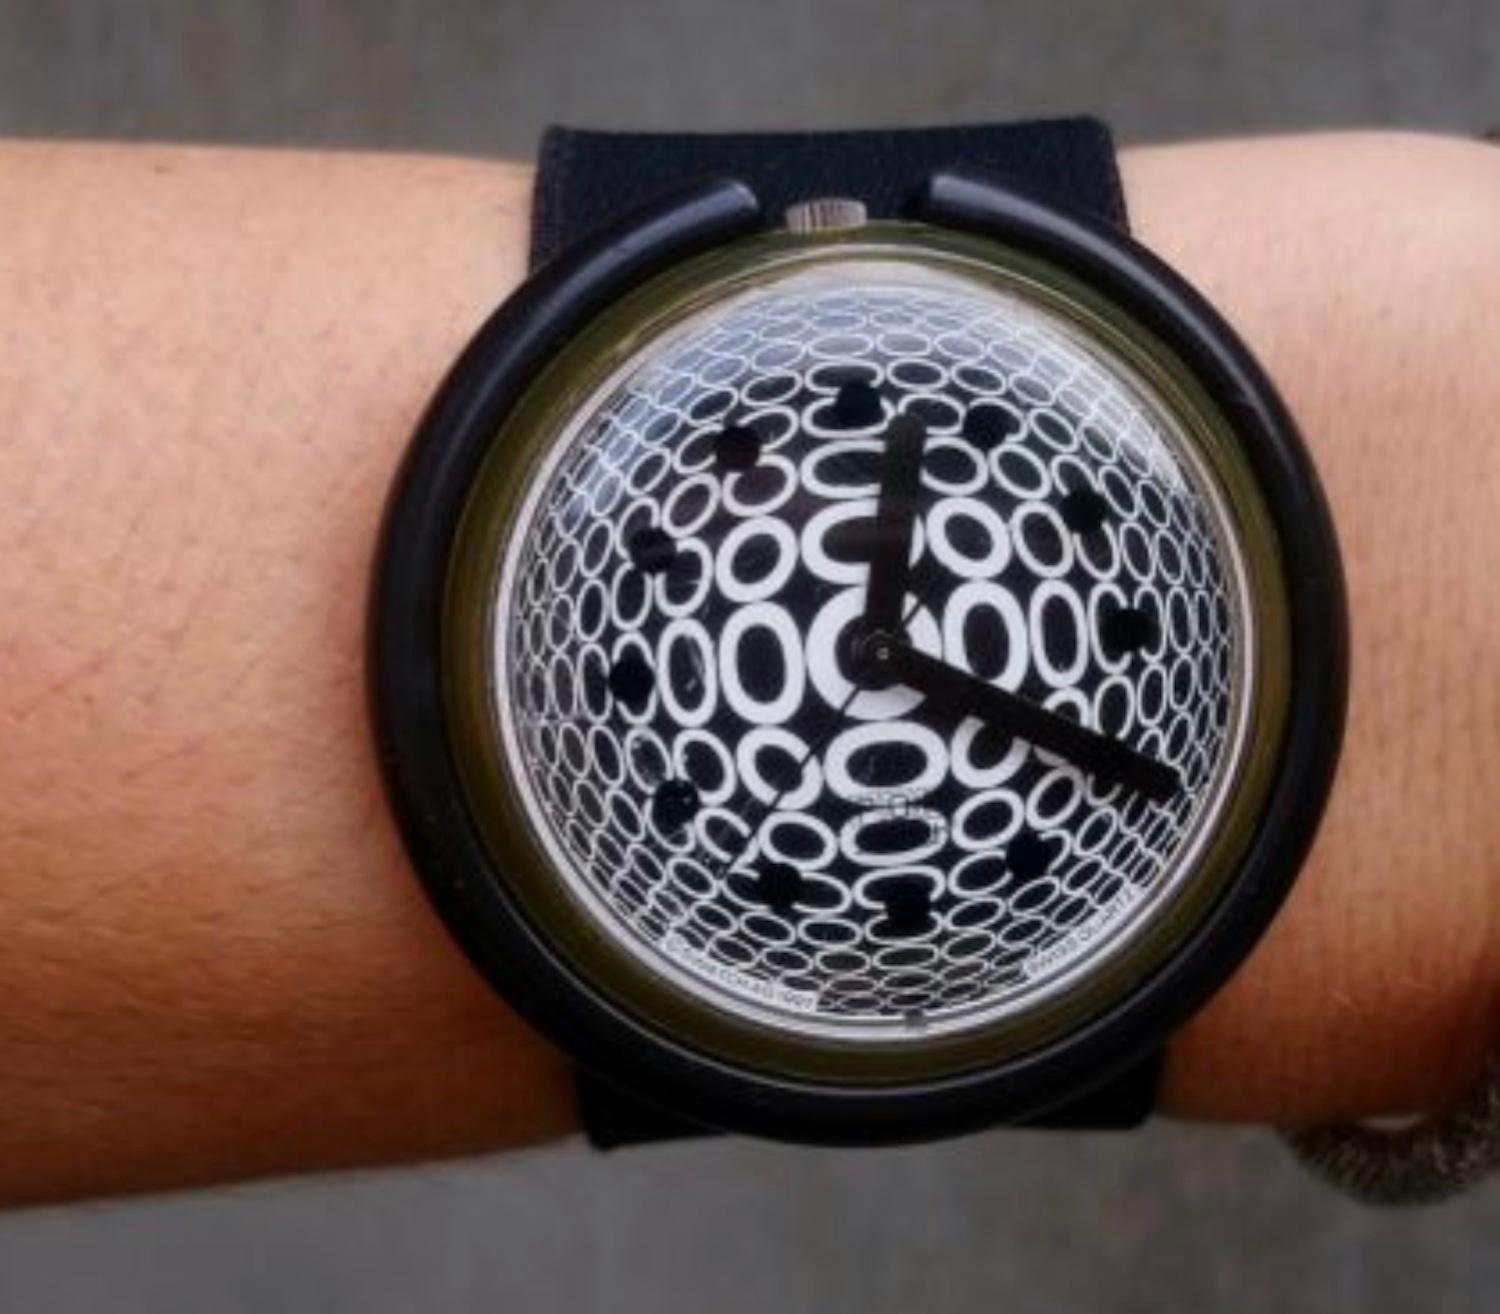 Modern 1992 Vintage POP Swatch Watch Special Dots - Op Art - Designed by Vasarely - NOS For Sale